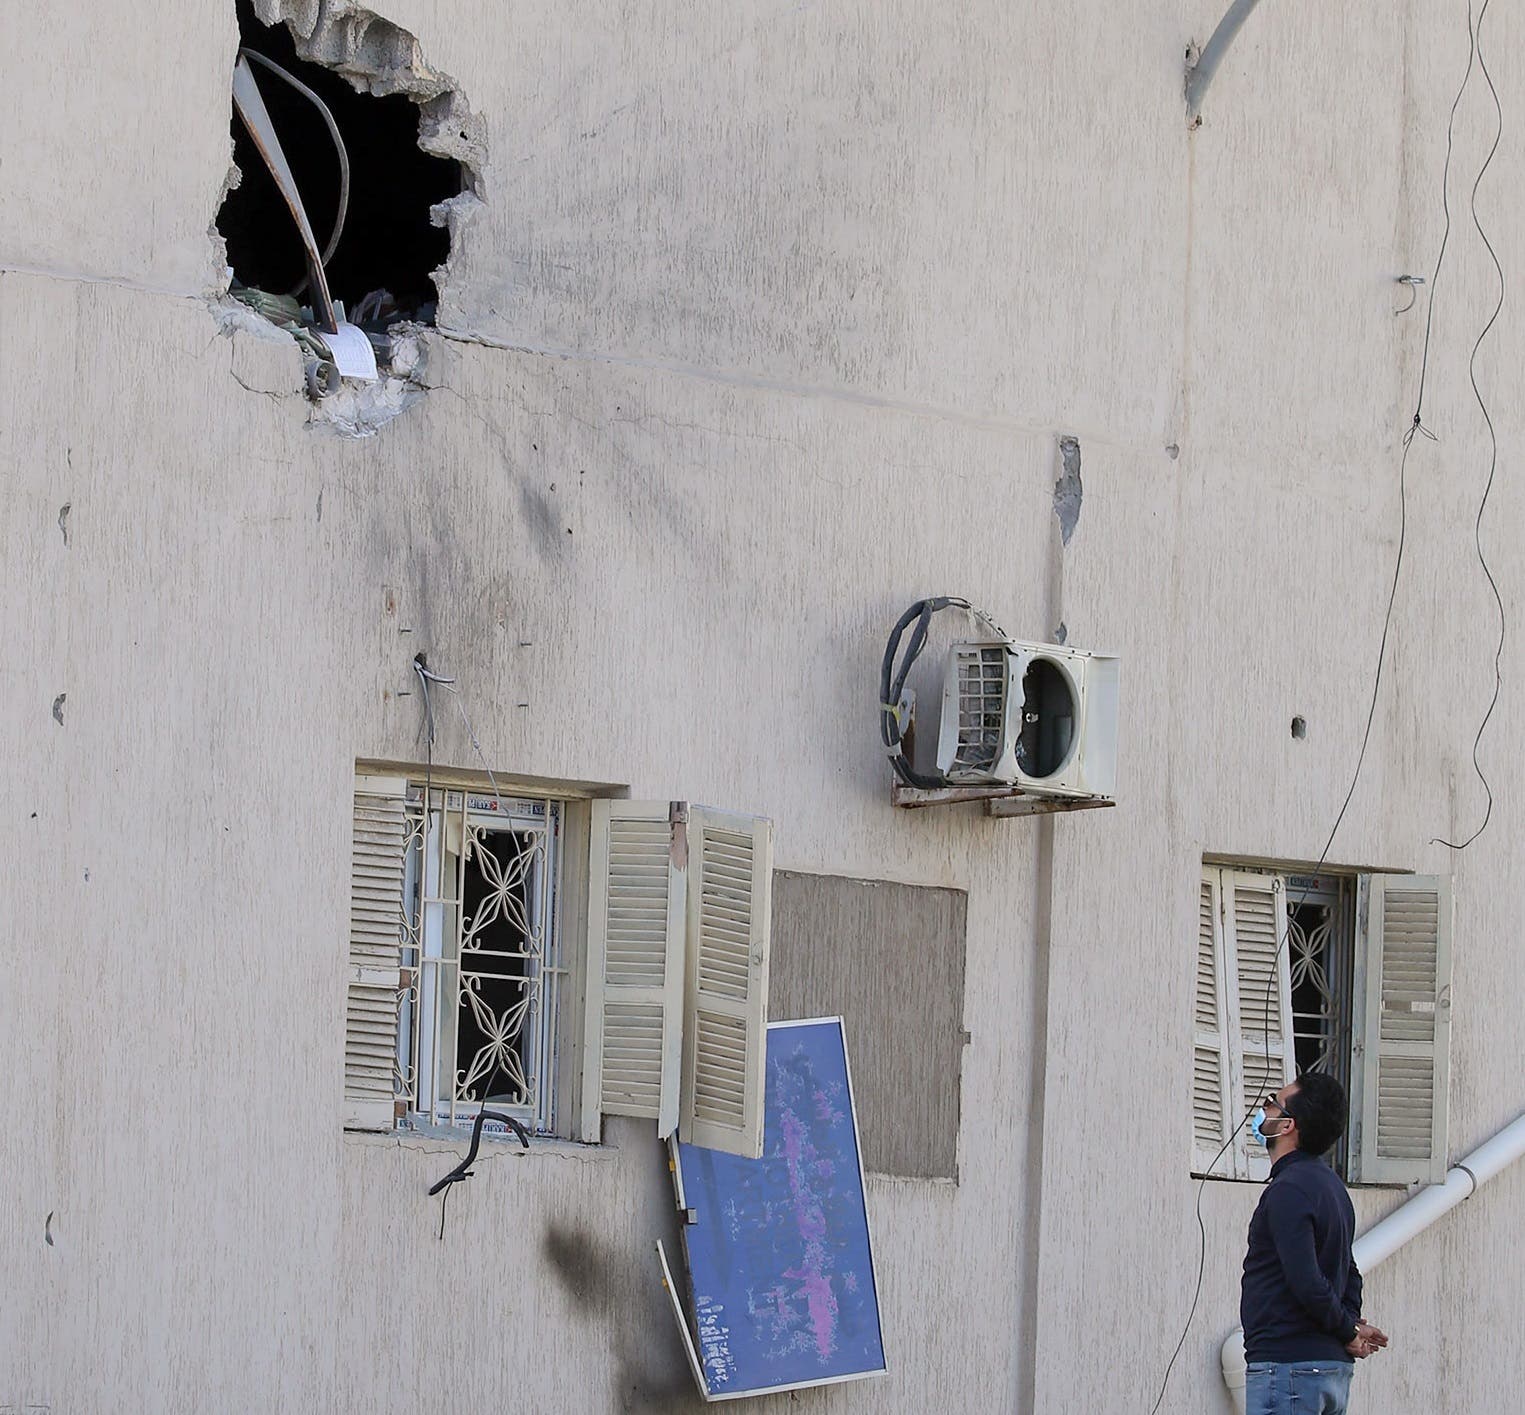 A man looks at a shrapnel hole in the wall of the Khadra General Hospital which is dedicated to treating people infected with coronavirus (COVID-19) in Tripoli on April 8, 2020. (AFP)